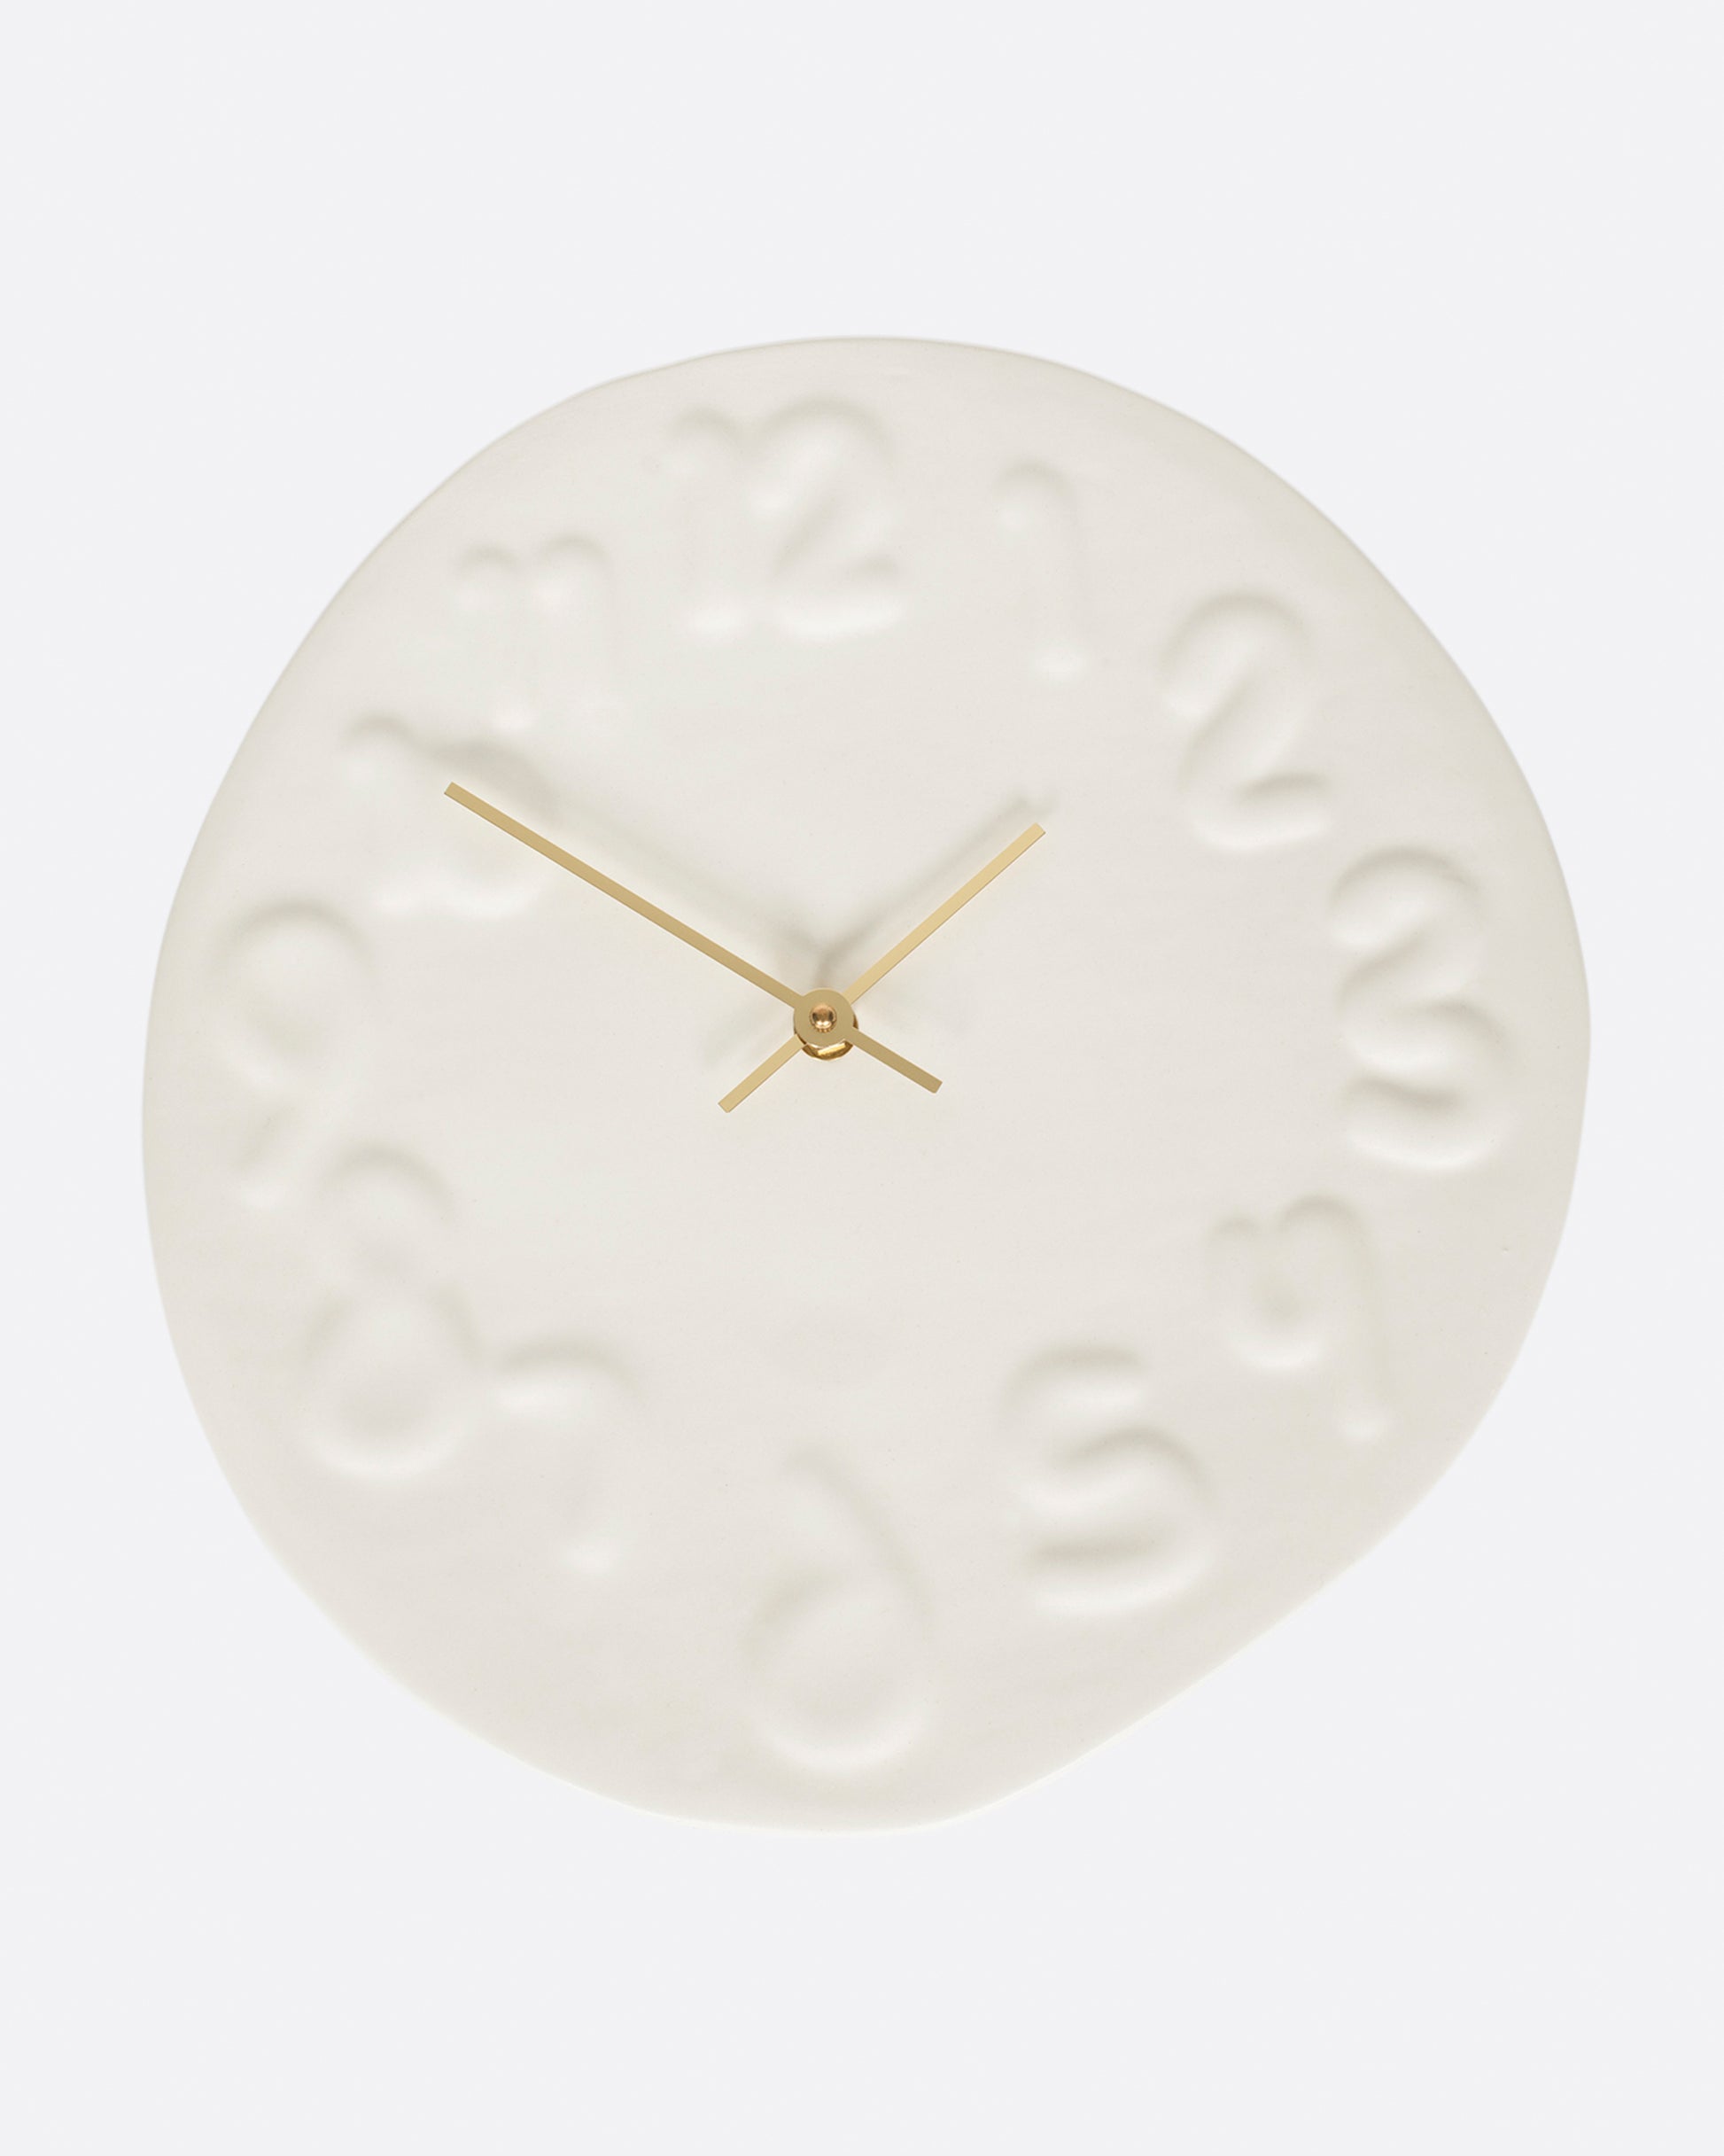 This handmade clock has brass hands and is a fun, yet subtle addition to any wall.